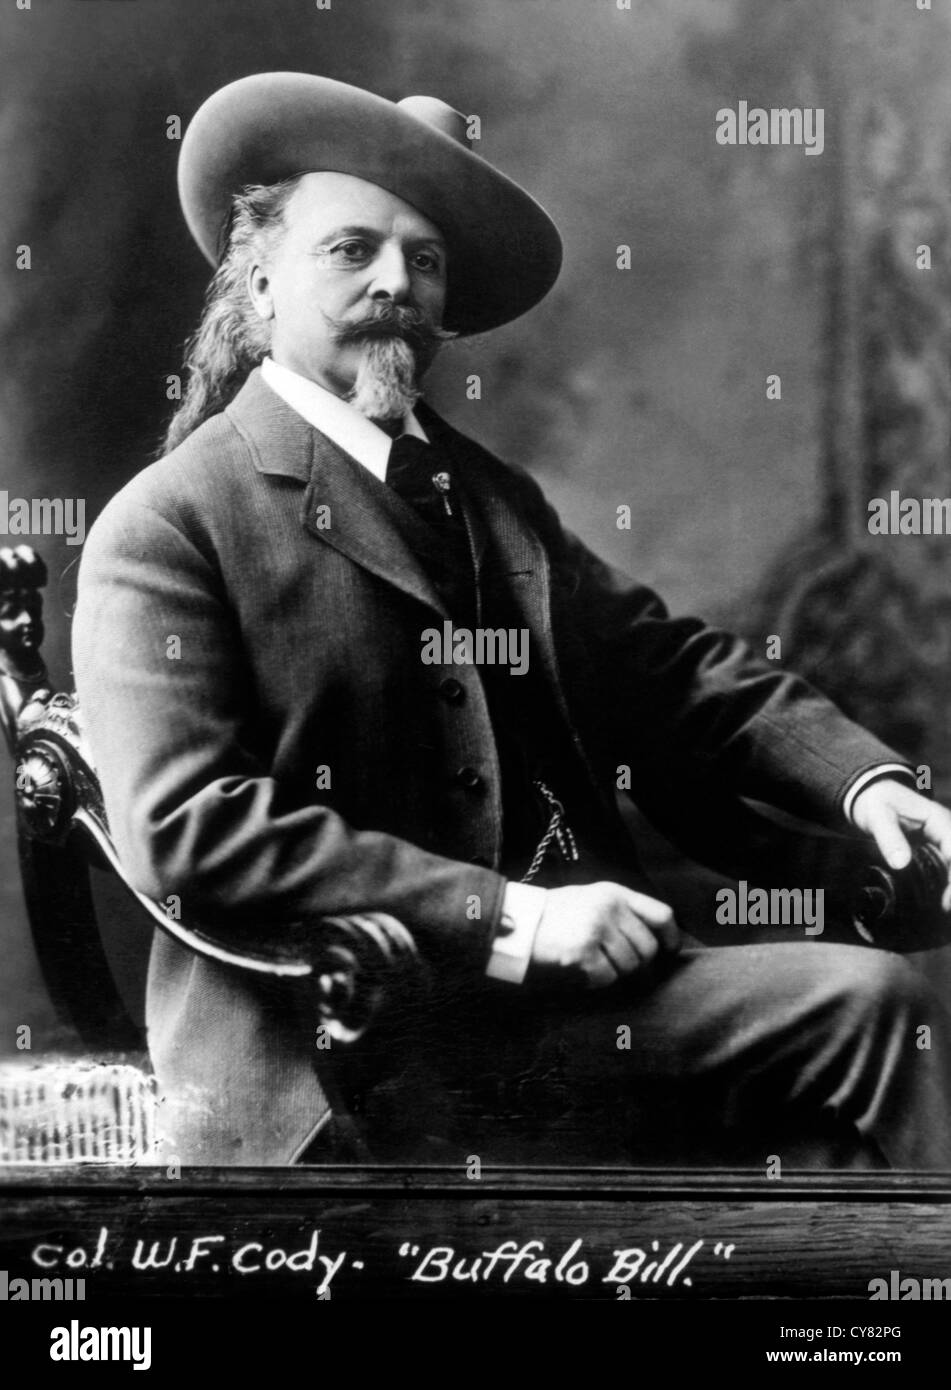 William Cody High Resolution Stock Photography Images - Alamy